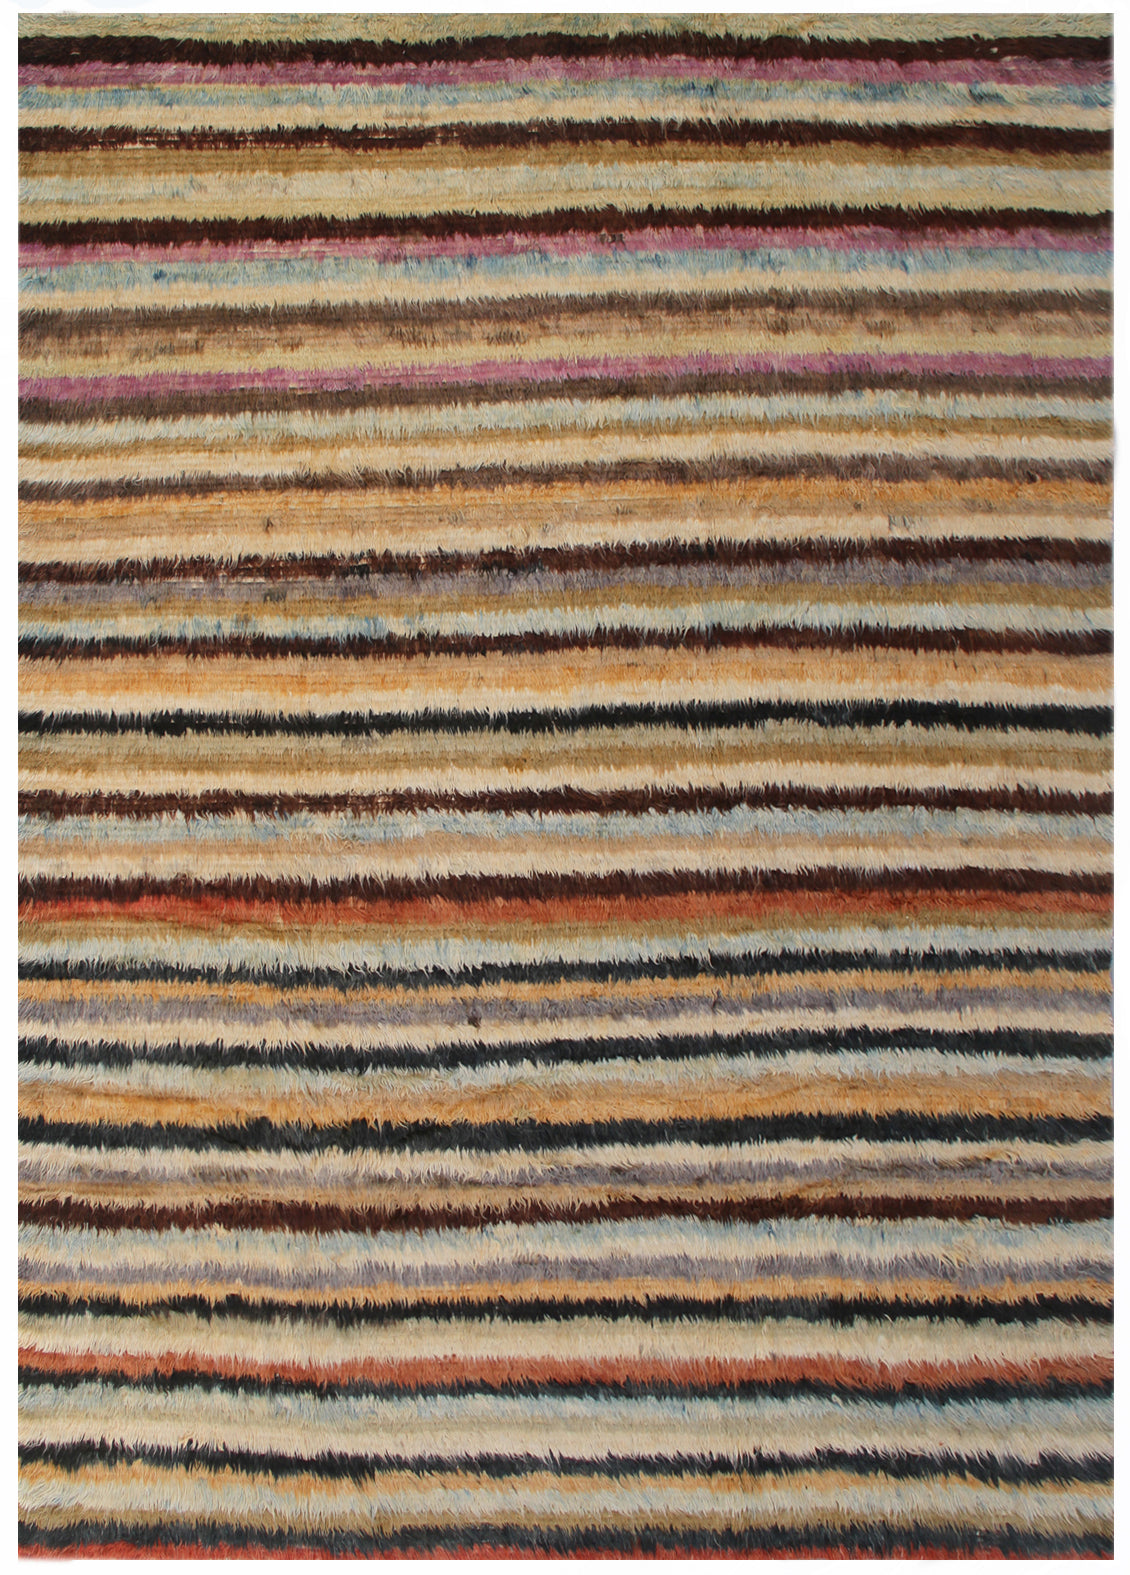 9'x12' Ariana Moroccan Style Striped Barchi Rug